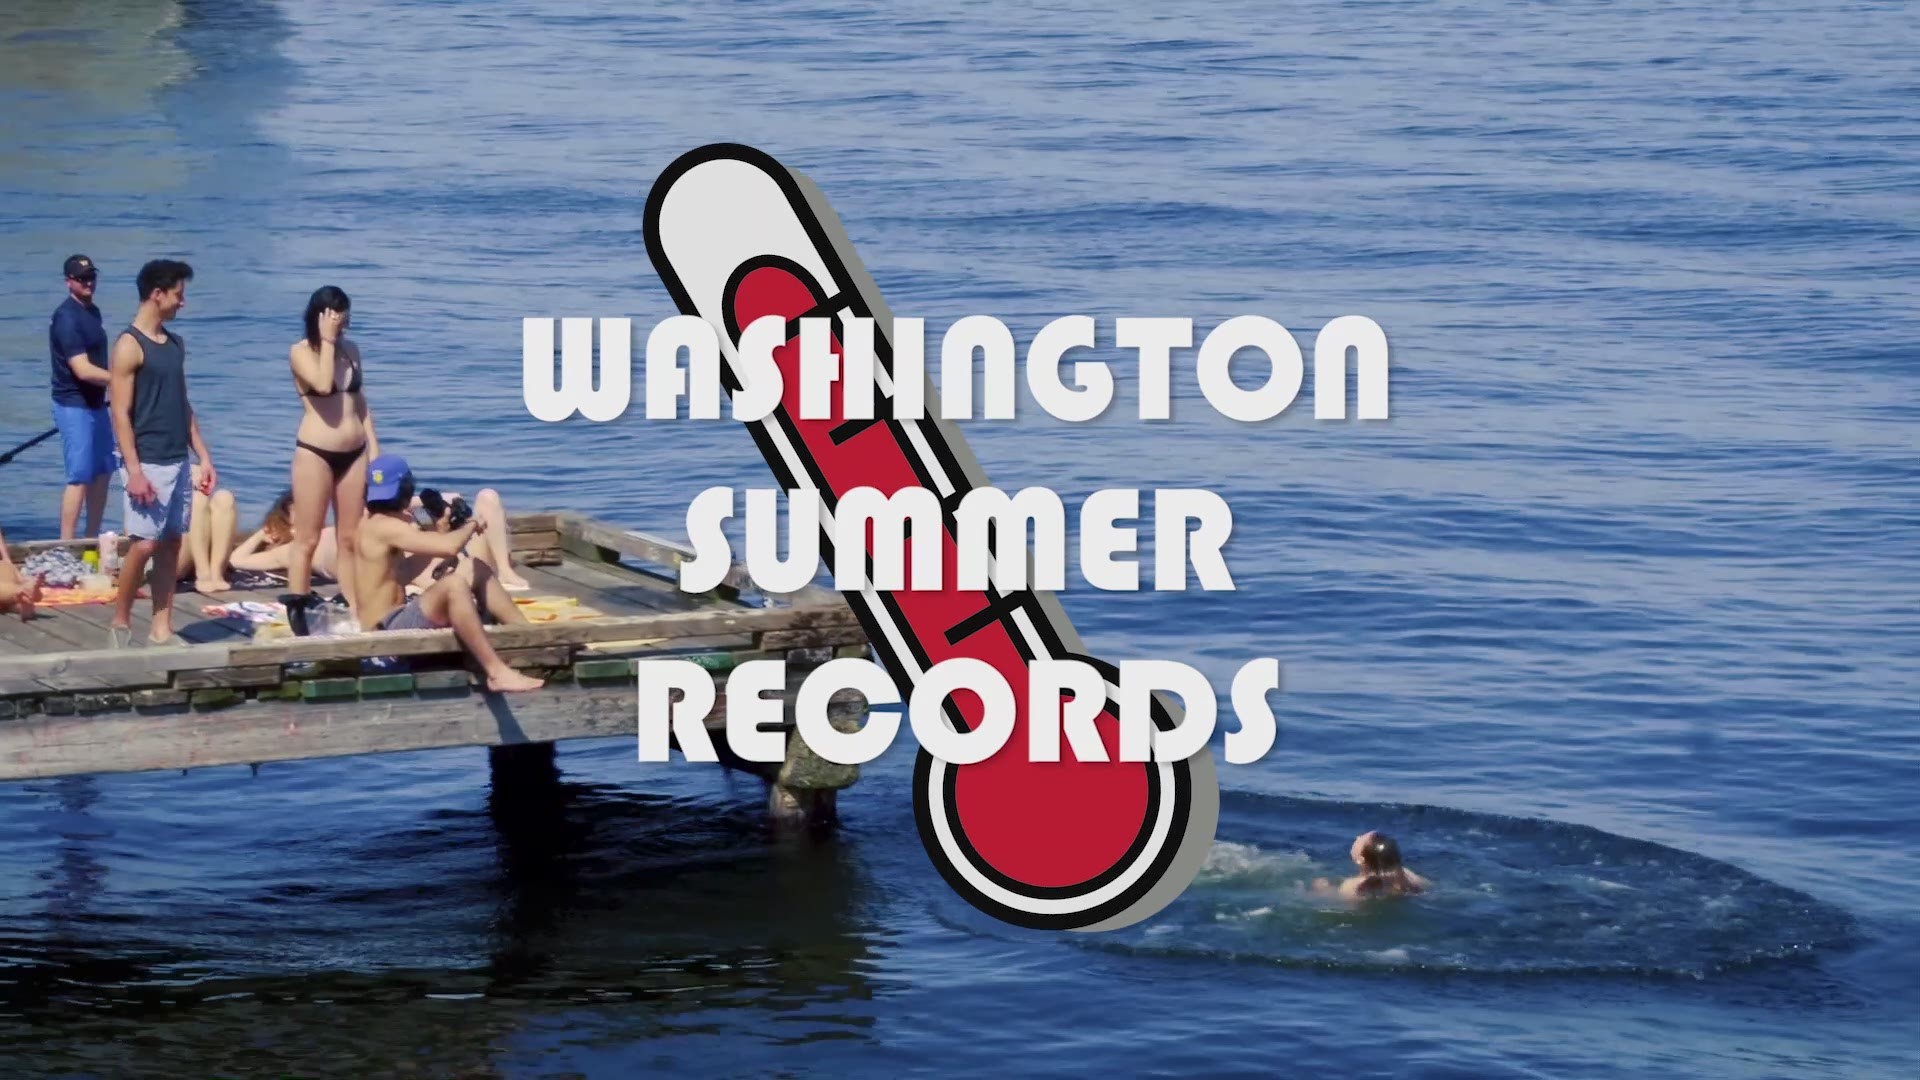 From the hottest day to the driest drought, here's the history of weather records in western Washington in summertime.